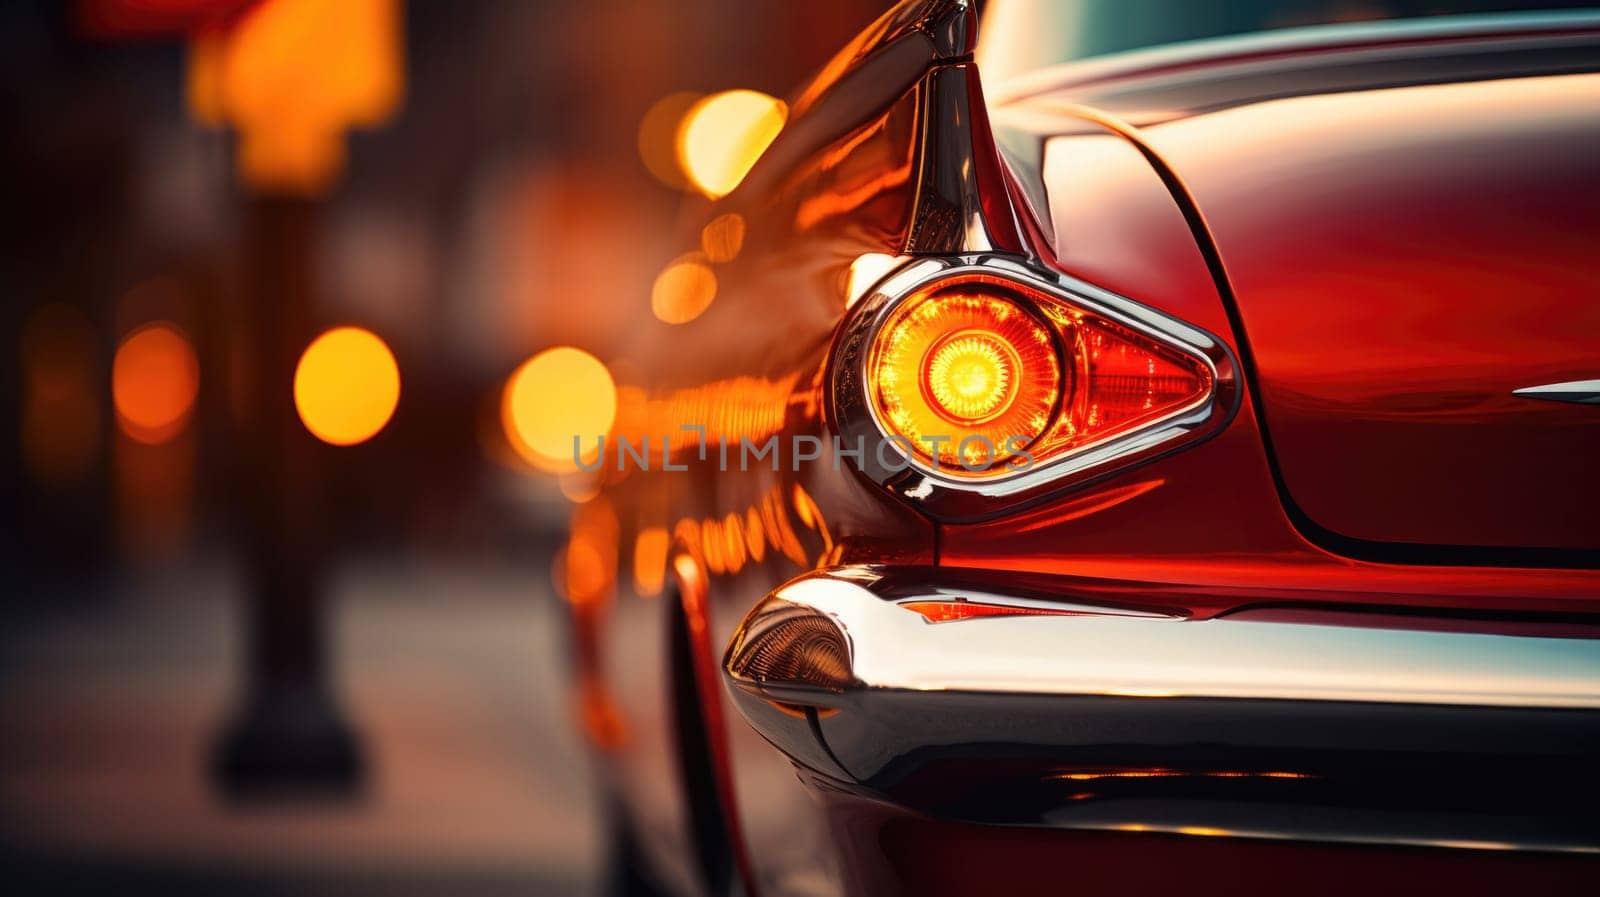 A close up of a red car with its tail light on